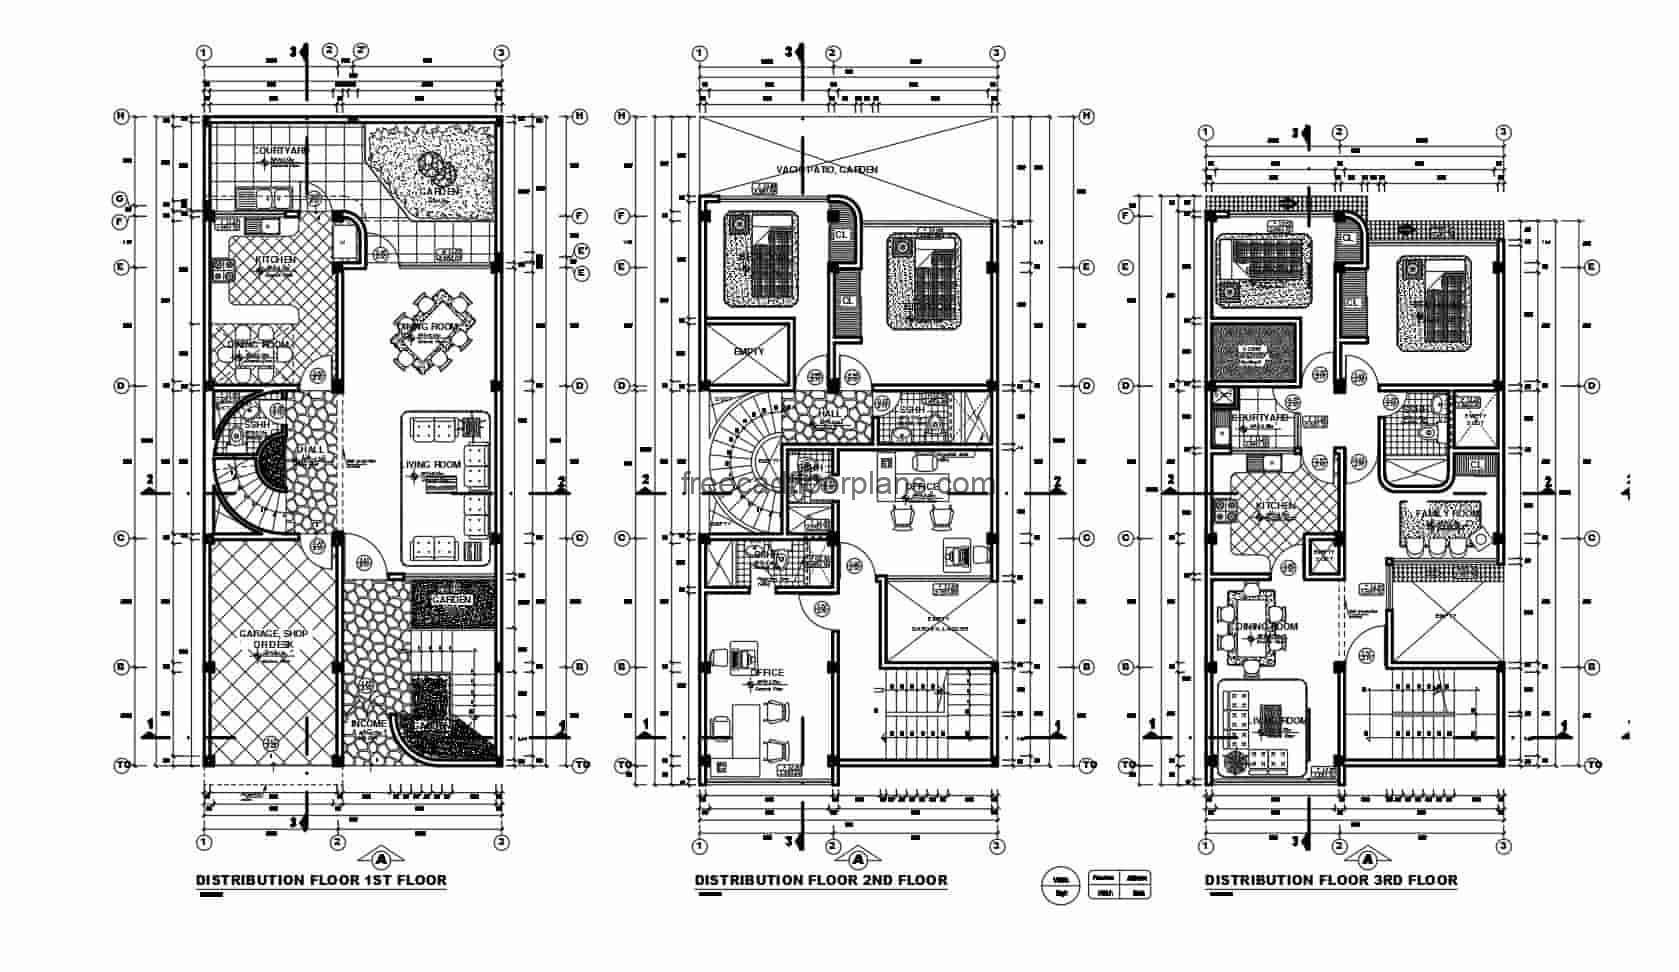 Architectural and dimensional plans in Autocad DWG drawings of a three level building with two houses, 2 rooms for each independent house, several offices and a usable roof, plan in editable format for free download.